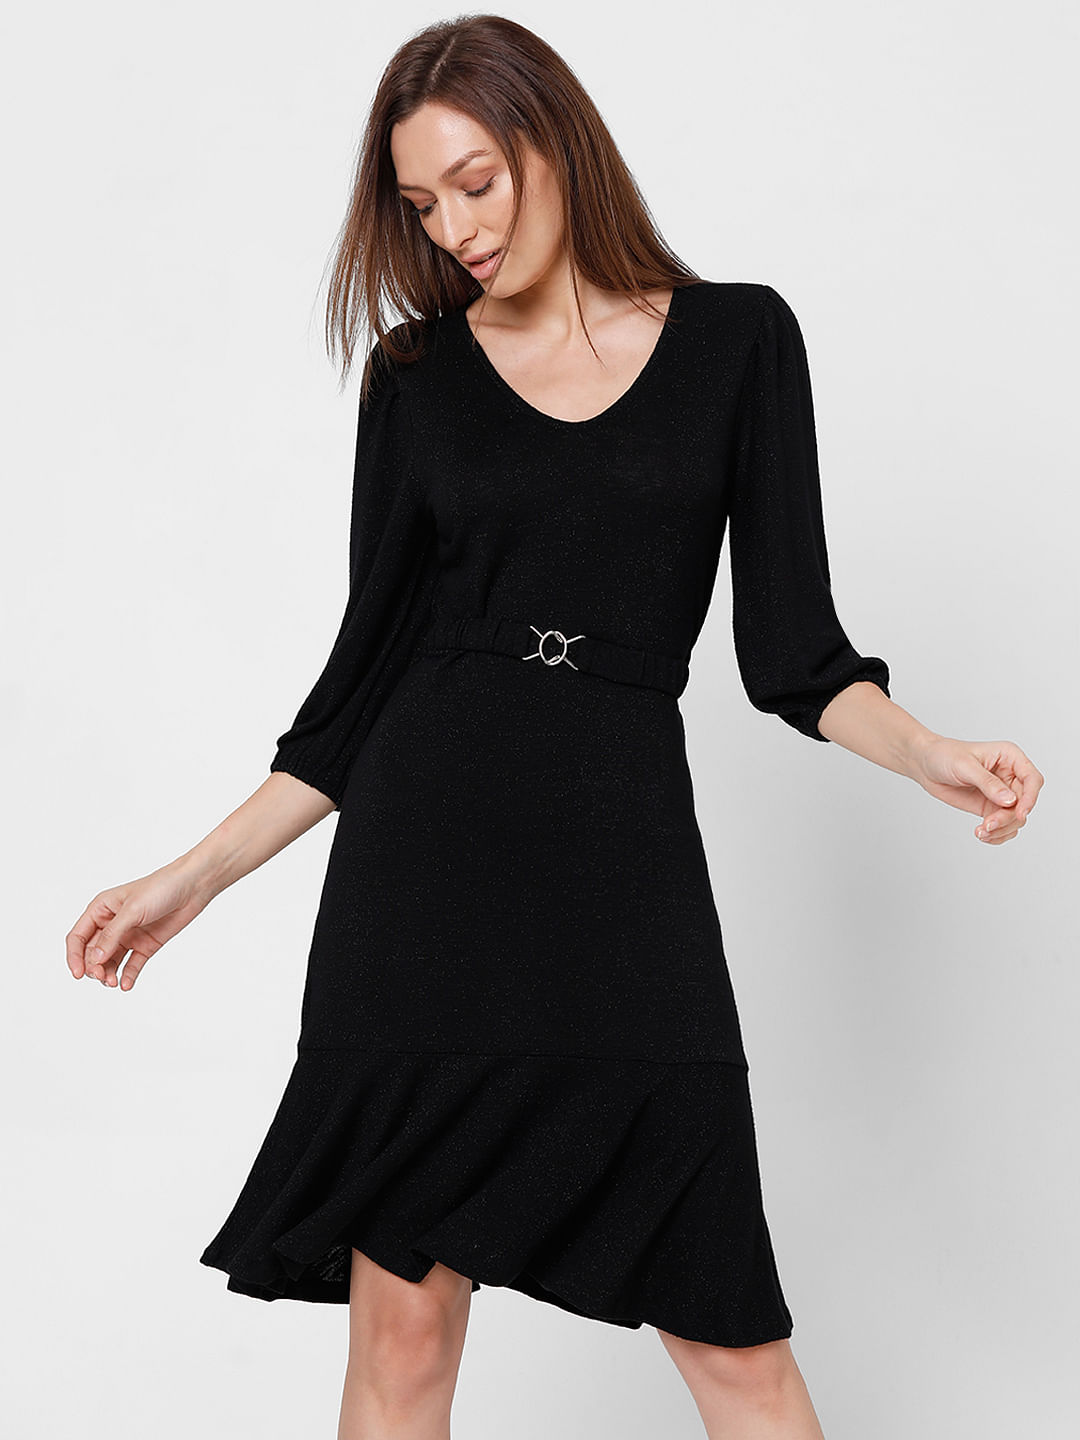 Long Sleeve Dresses & Dresses with Sleeves | Glassons